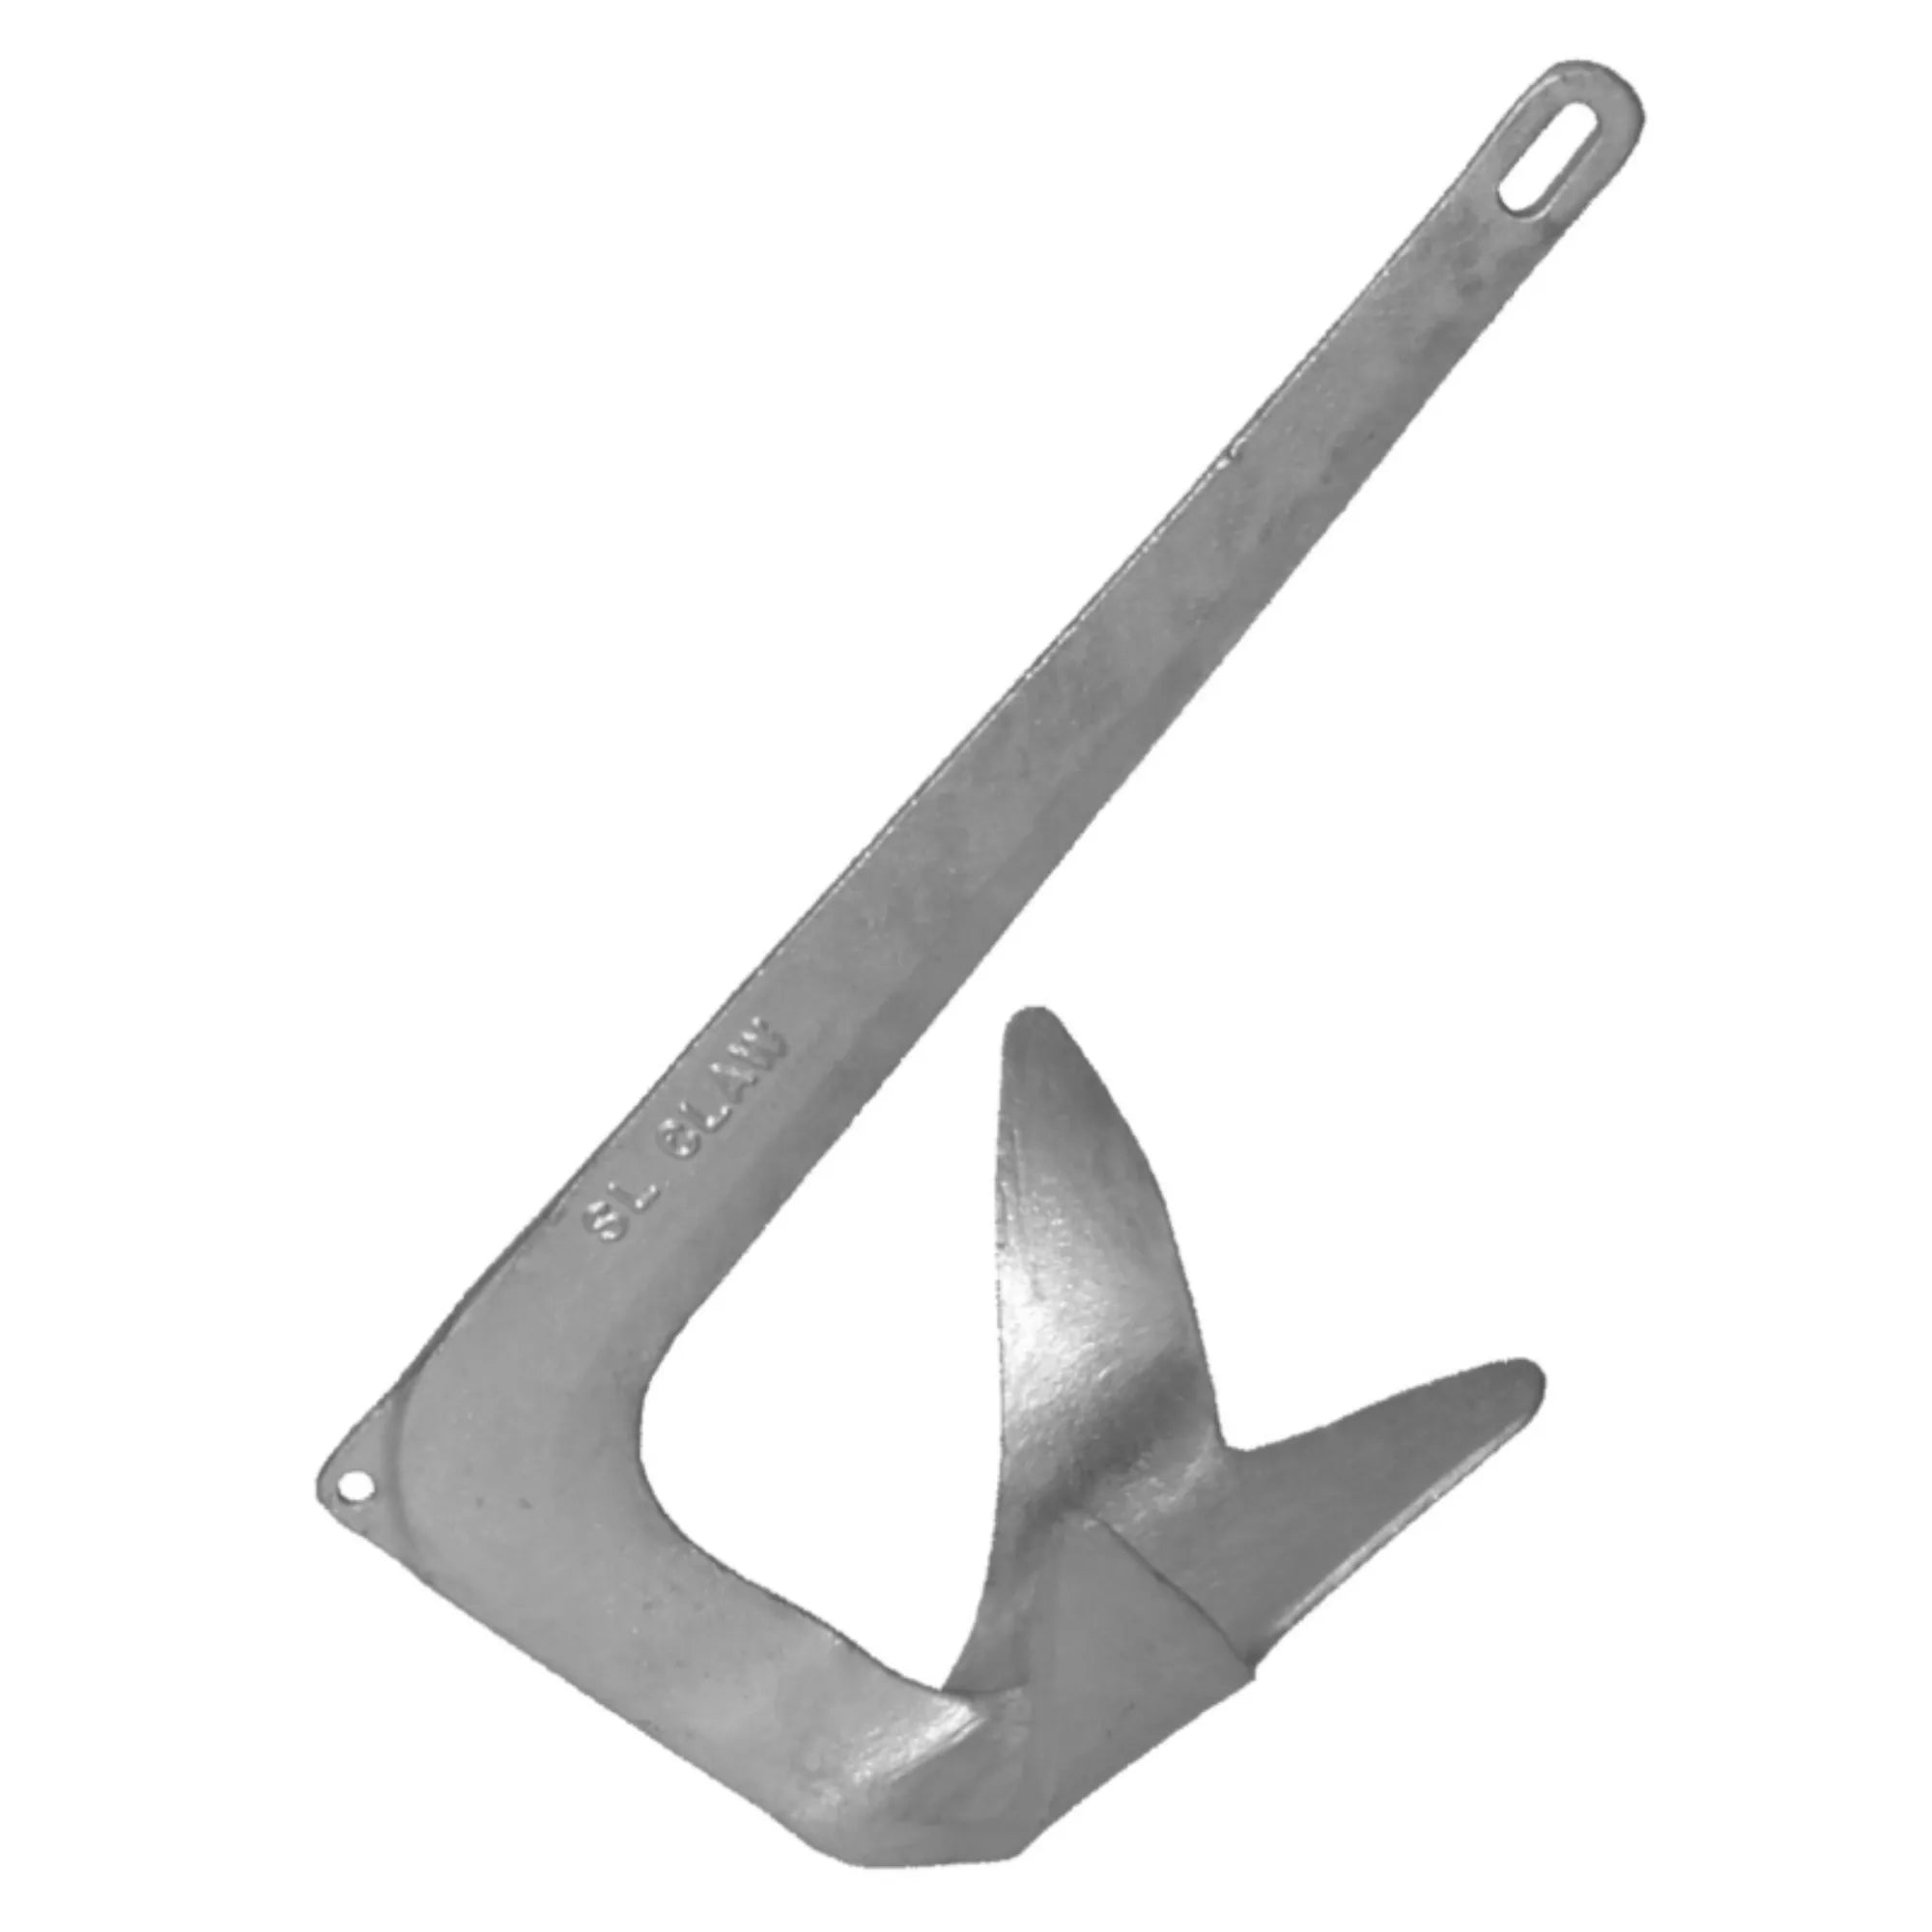 Bruce Style Anchor - Galvanised